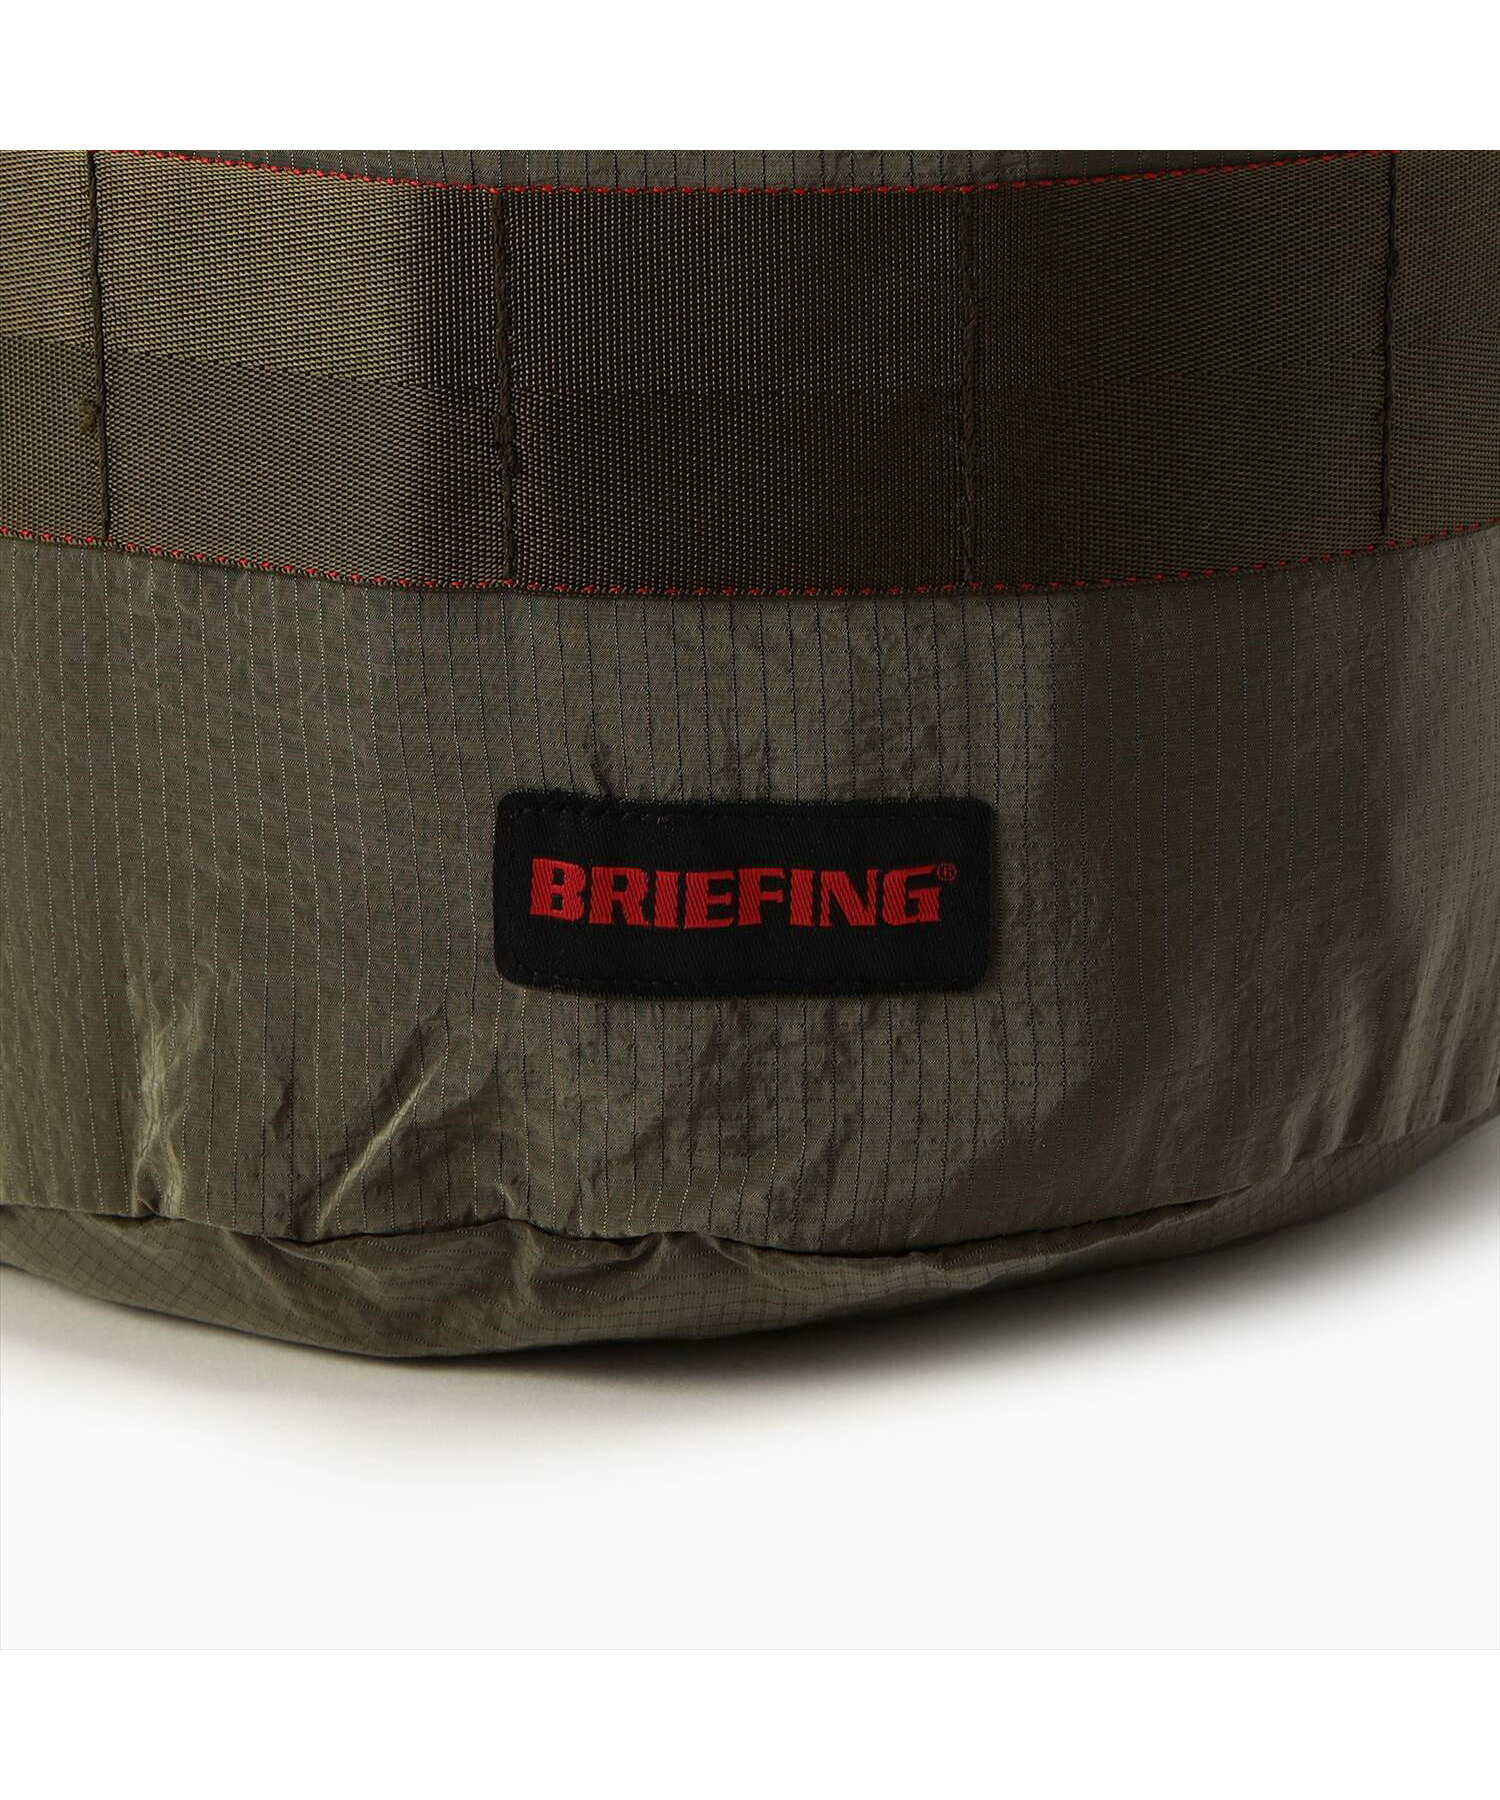 【BRIEFING/ブリーフィング】QUILTING BLANKET